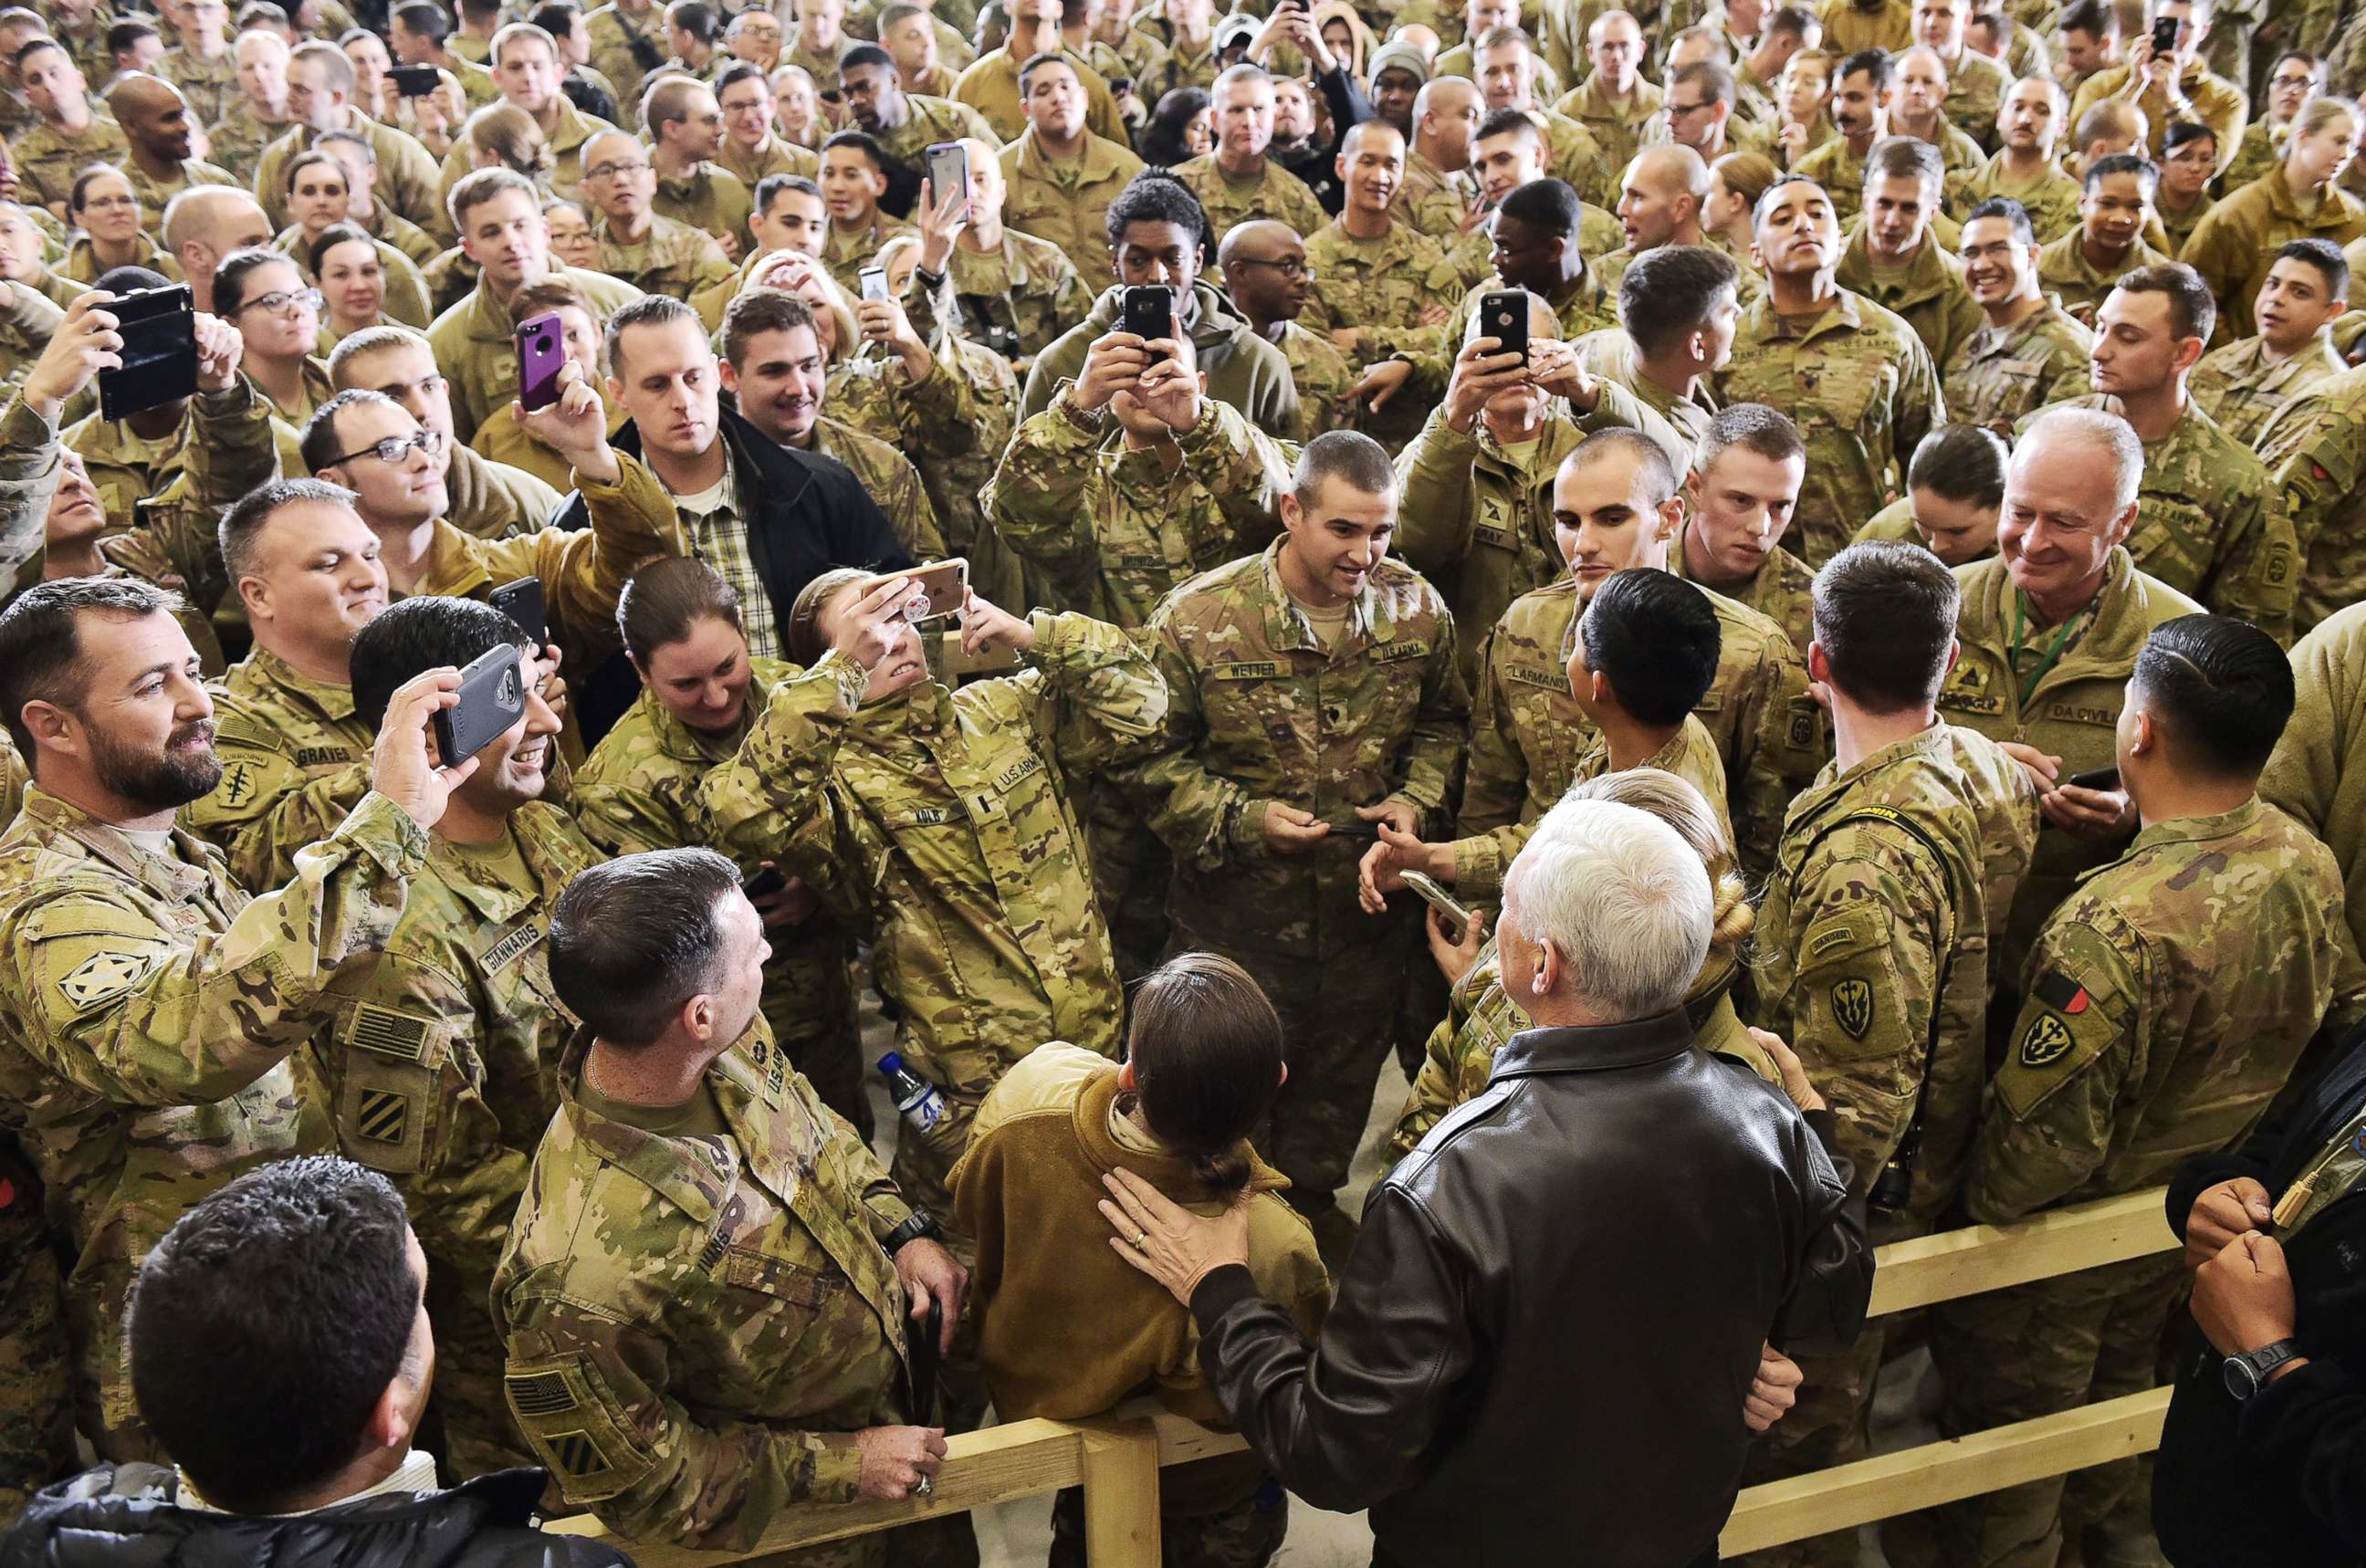 PHOTO: Vice President Mike Pence poses for photos with troops after addressing them in a hangar at Bagram Air Field in Afghanistan on Dec. 21, 2017.